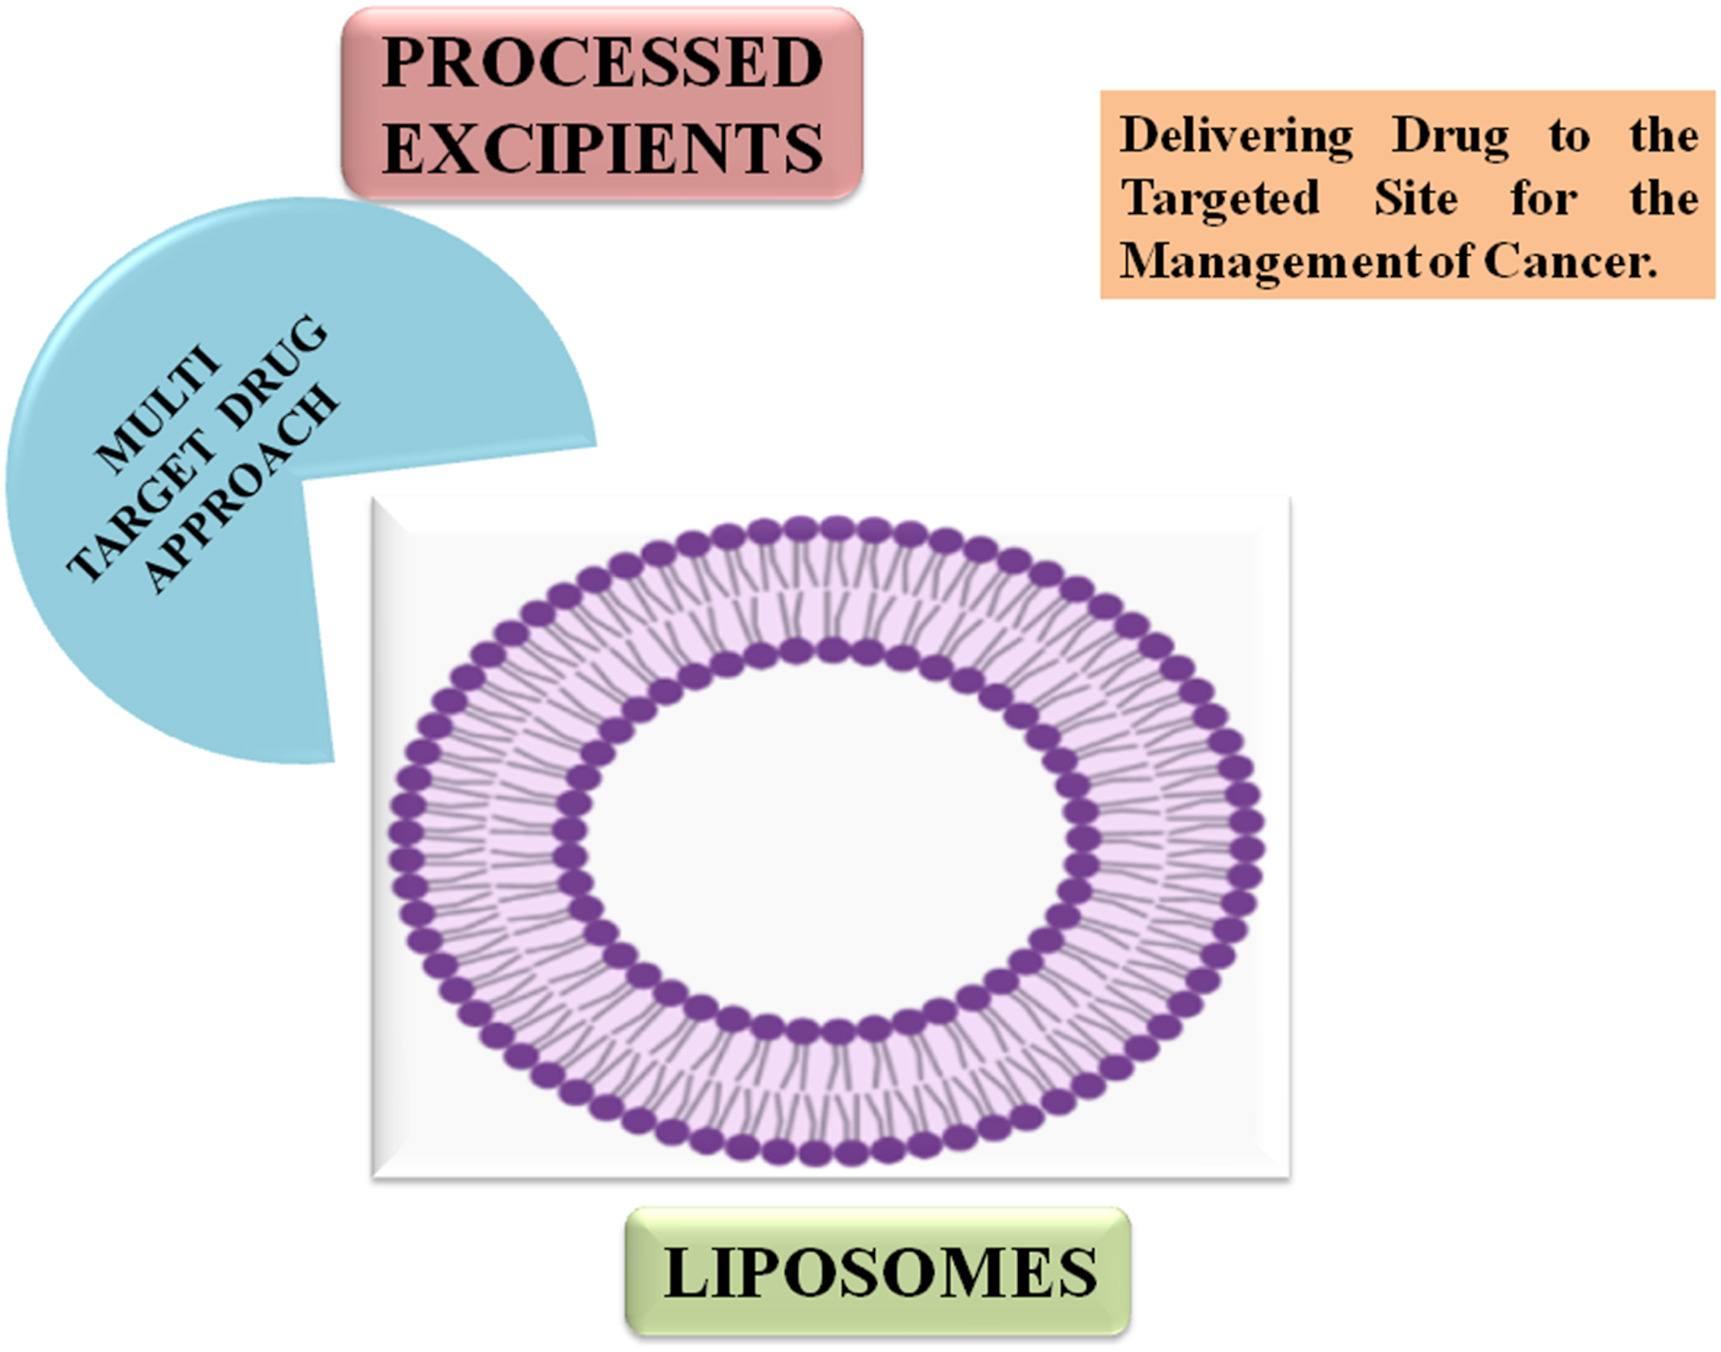 Processed excipients for targeted drug delivery in cancer management: Enhancing efficacy and precision